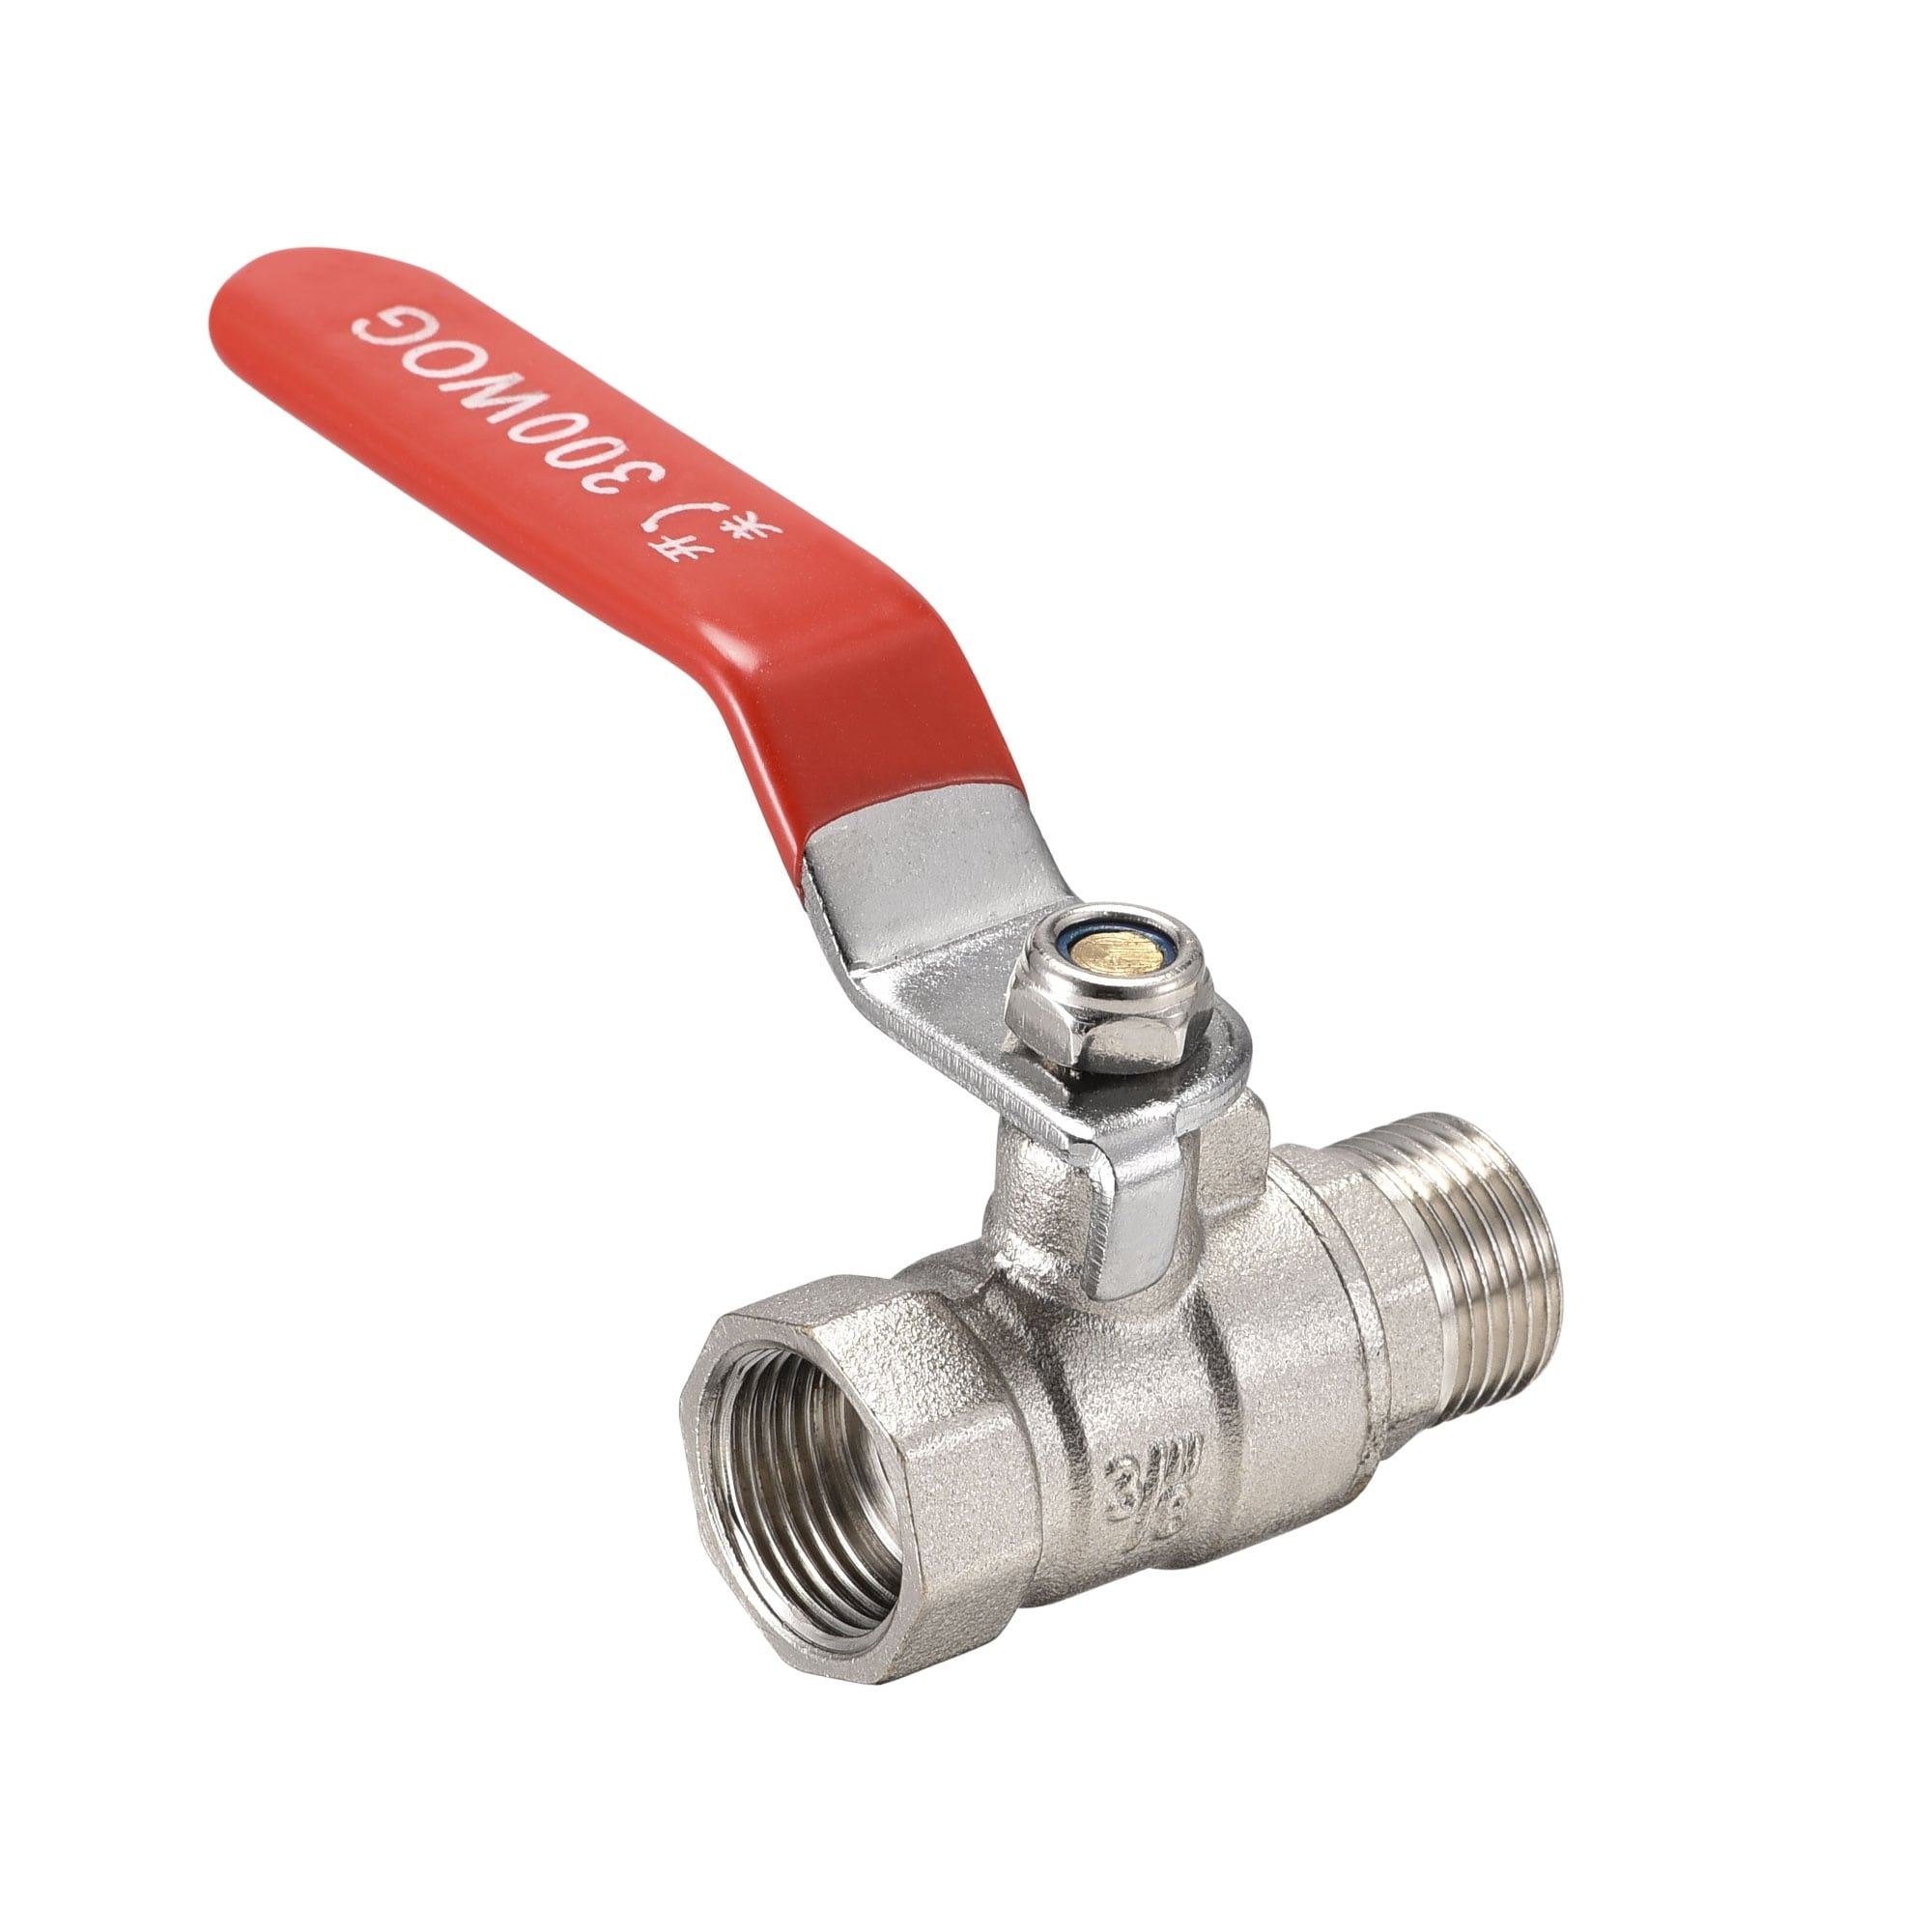 15mm Lever Ball Valve Red Handle Brass Compression Fitting Stop Shut-off PN25